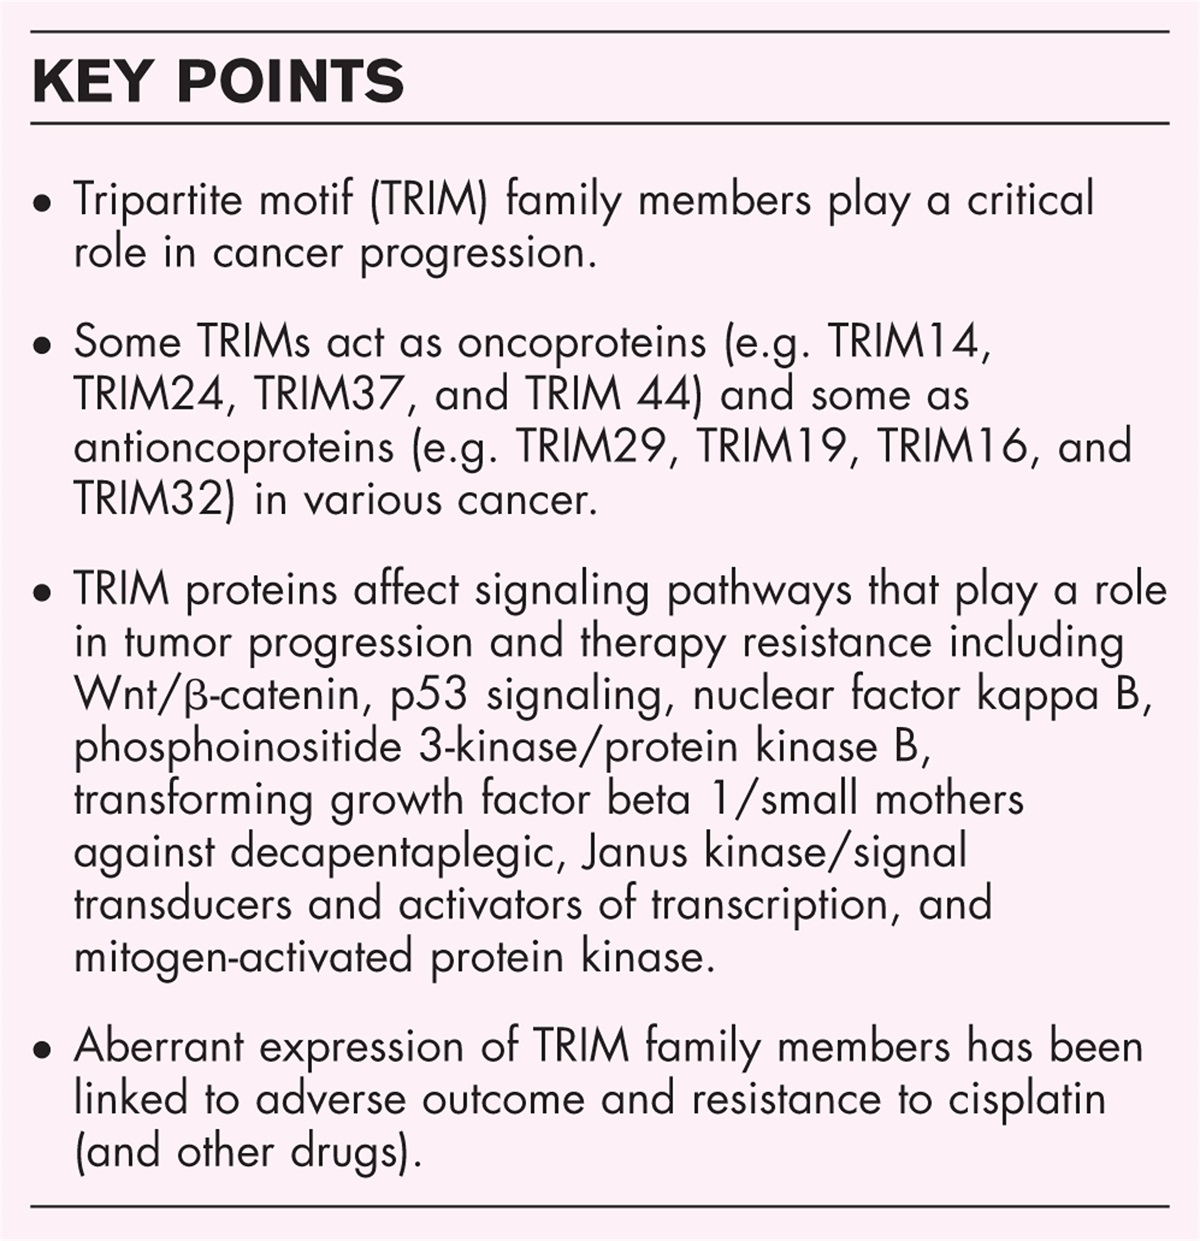 Tripartite motif family – its role in tumor progression and therapy resistance: a review